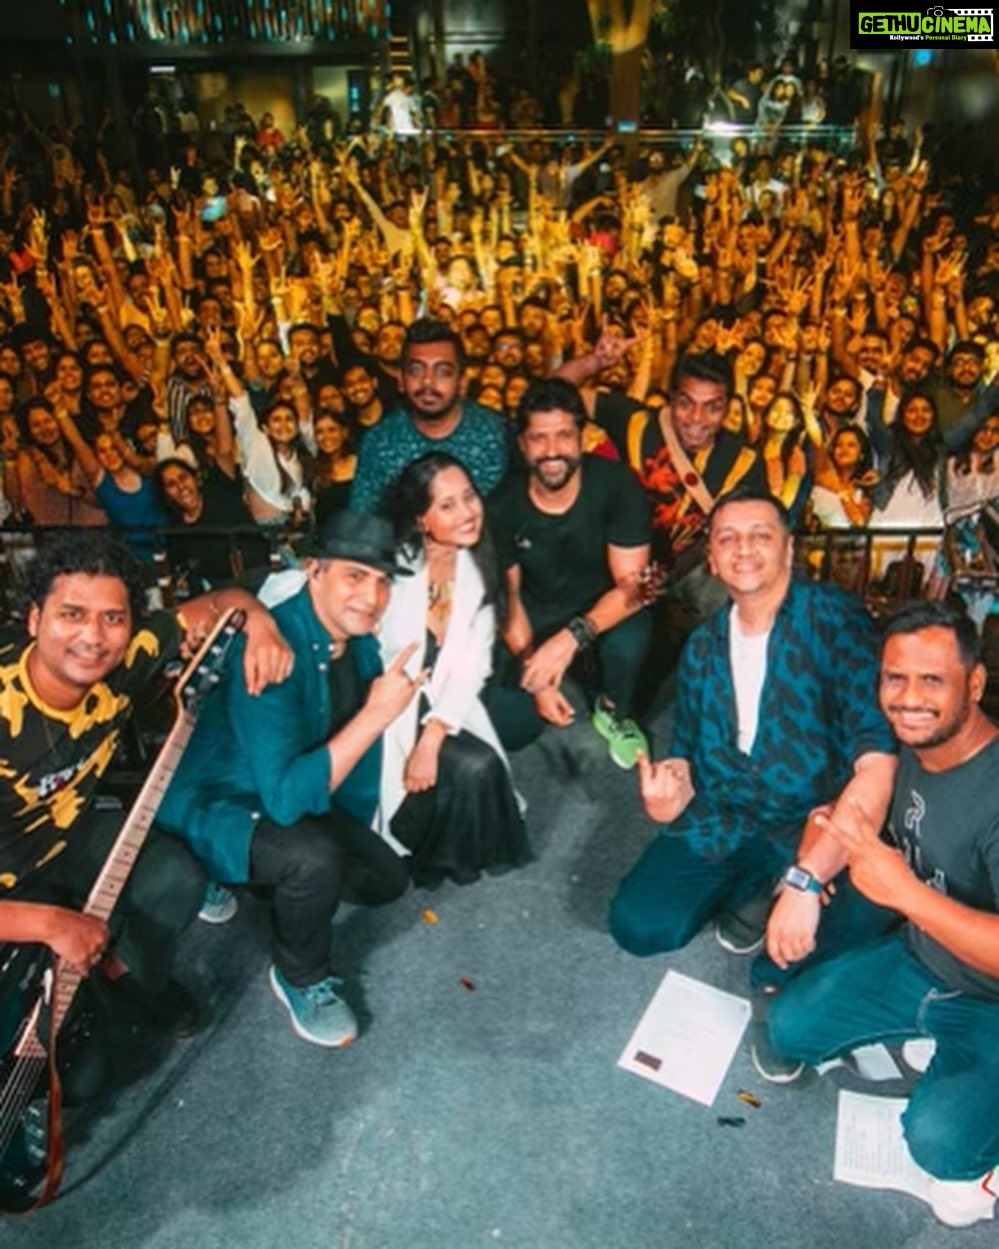 Farhan Akhtar Instagram - About last night. Thank you Pune .. you were AMAZING!! 🤘🏽🤘🏽🤘🏽🤘🏽❤️ farhanliveofficial #bollyboomindiatour #musiclove #giglife Images: @haintohhain 😊🙏🏽